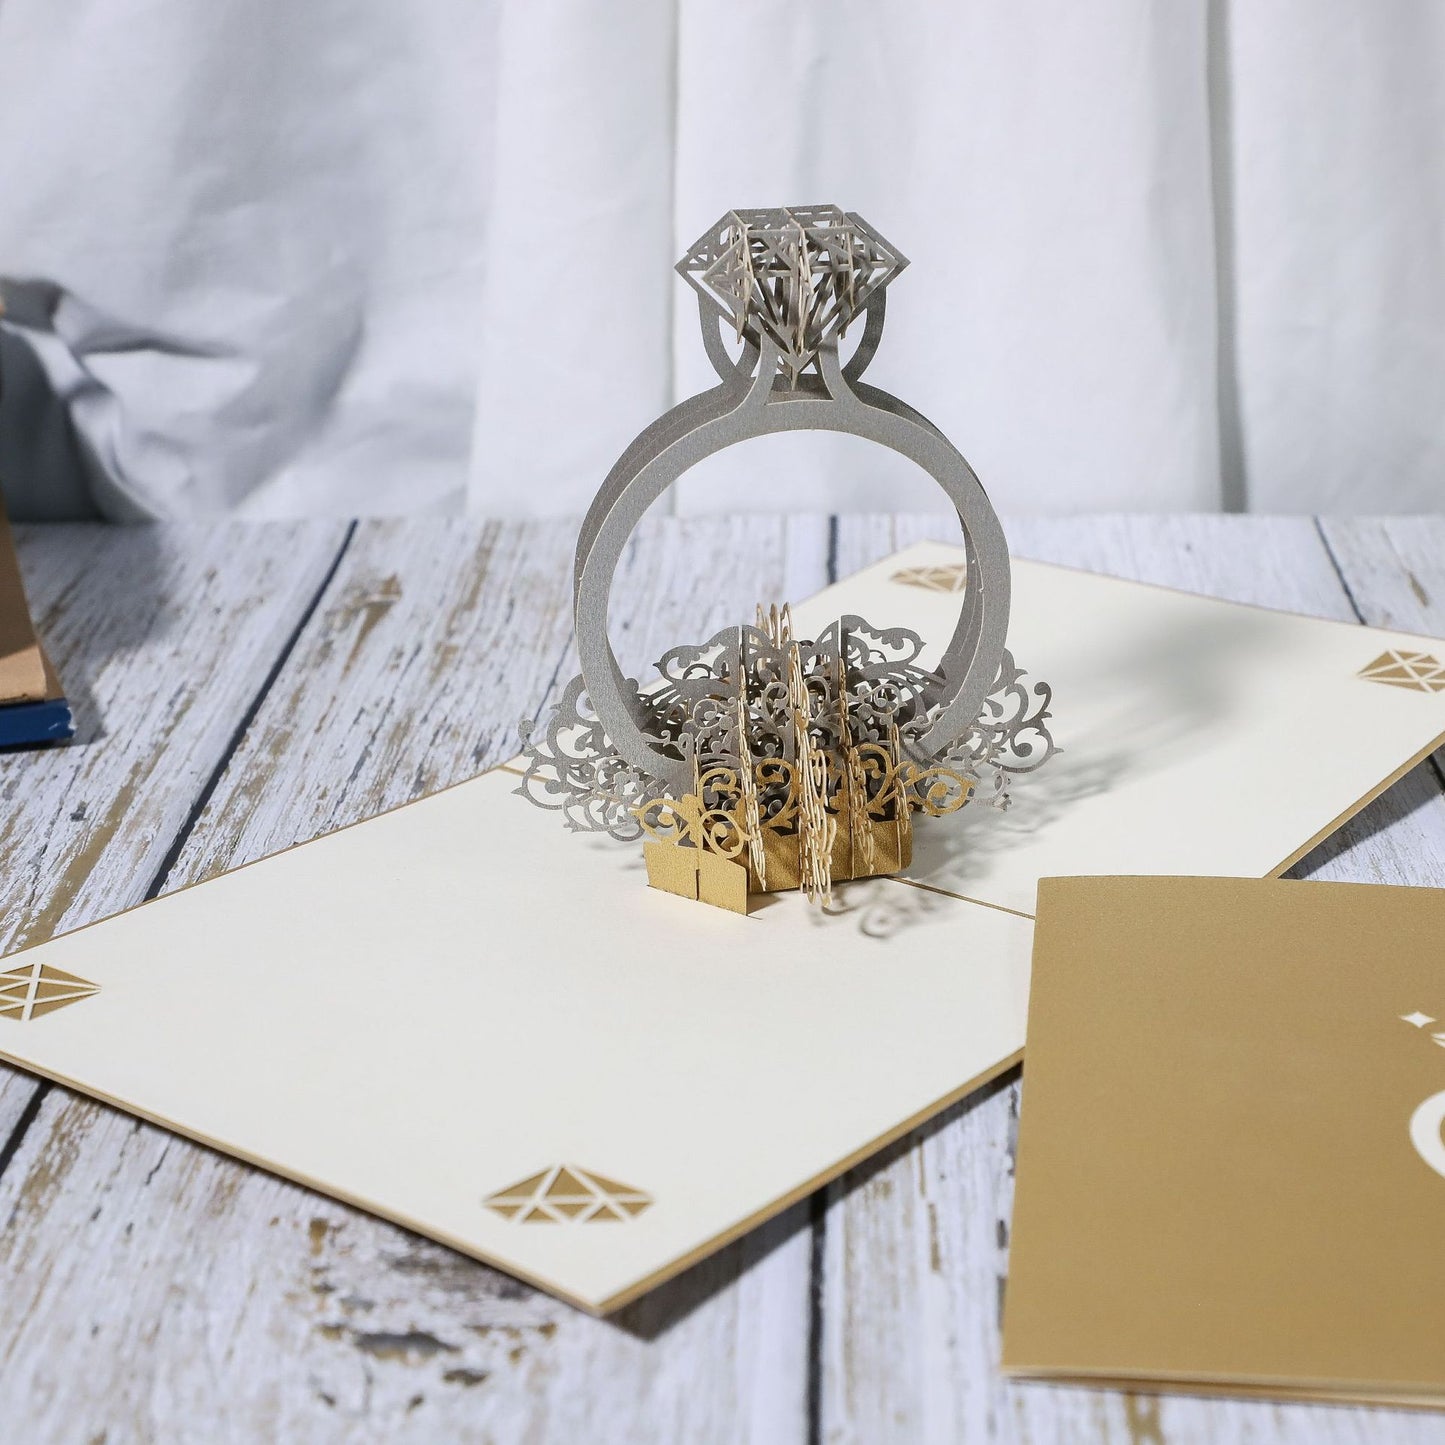 3D Lovers Greeting Cards